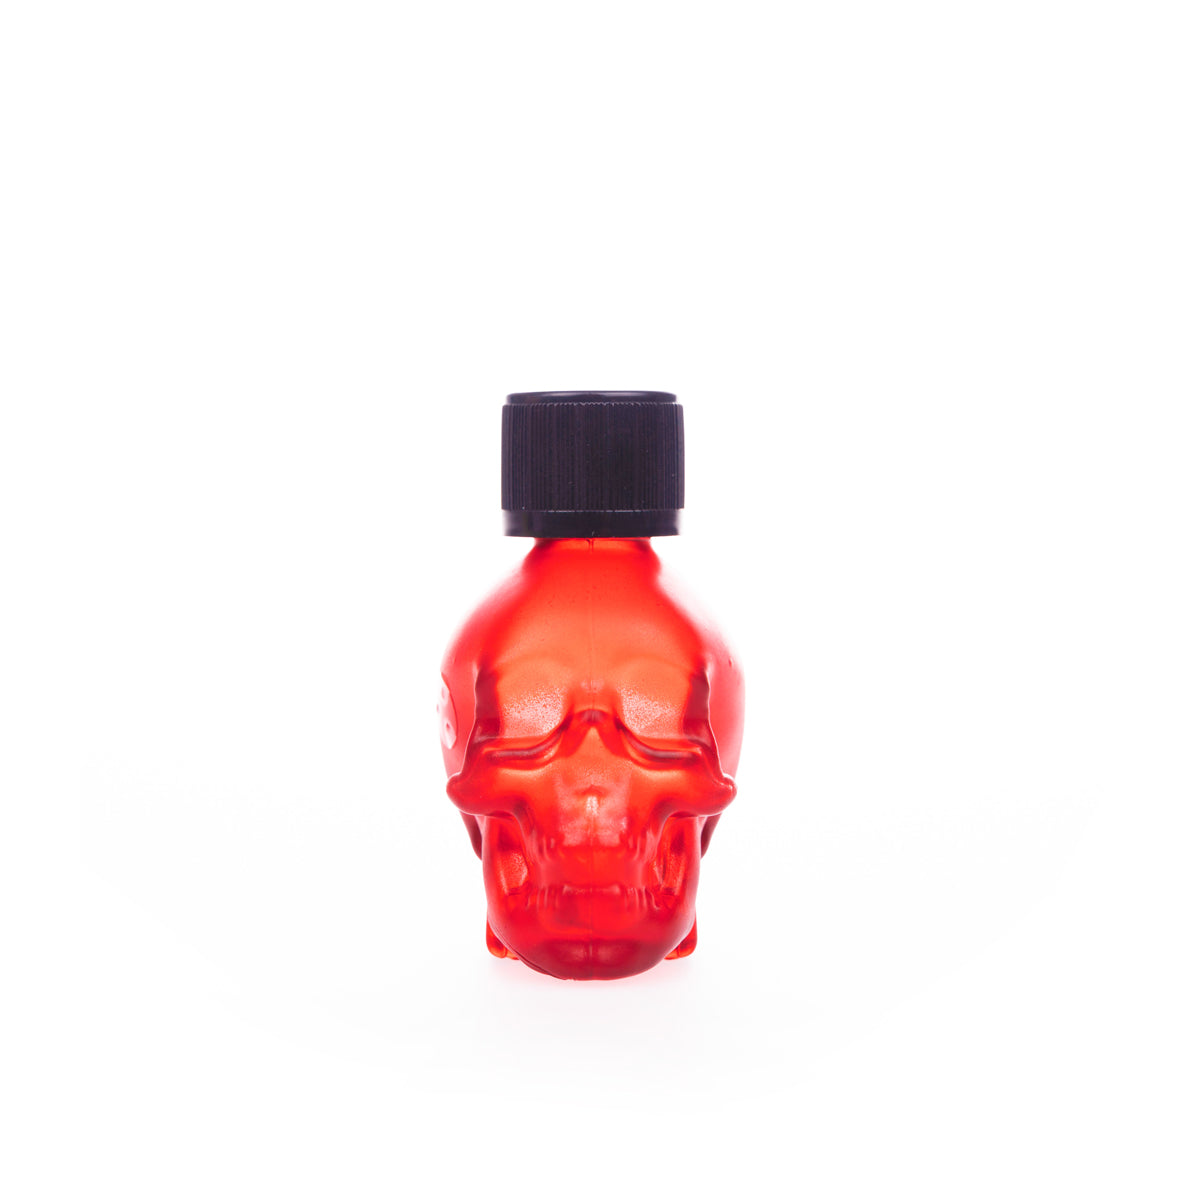 A product photo of Skull Fuck Ruby Poppers by Twisted Beast.